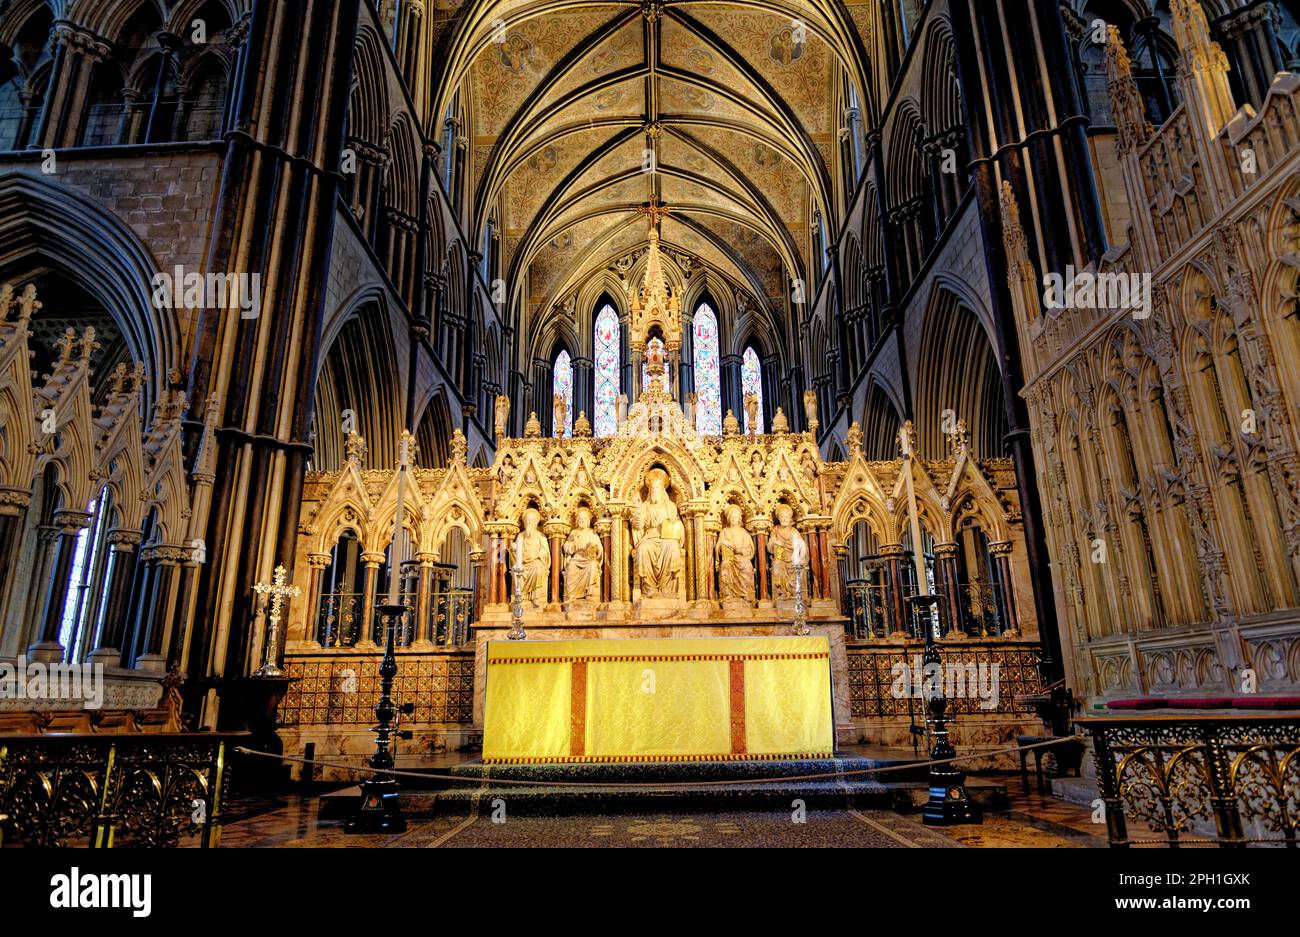 Intricate carving of the High Altar before the East Window in Worcester Cathedral, Worcester, Worcestershire, England, United Kingdom - 28th of Januar Stock Photo